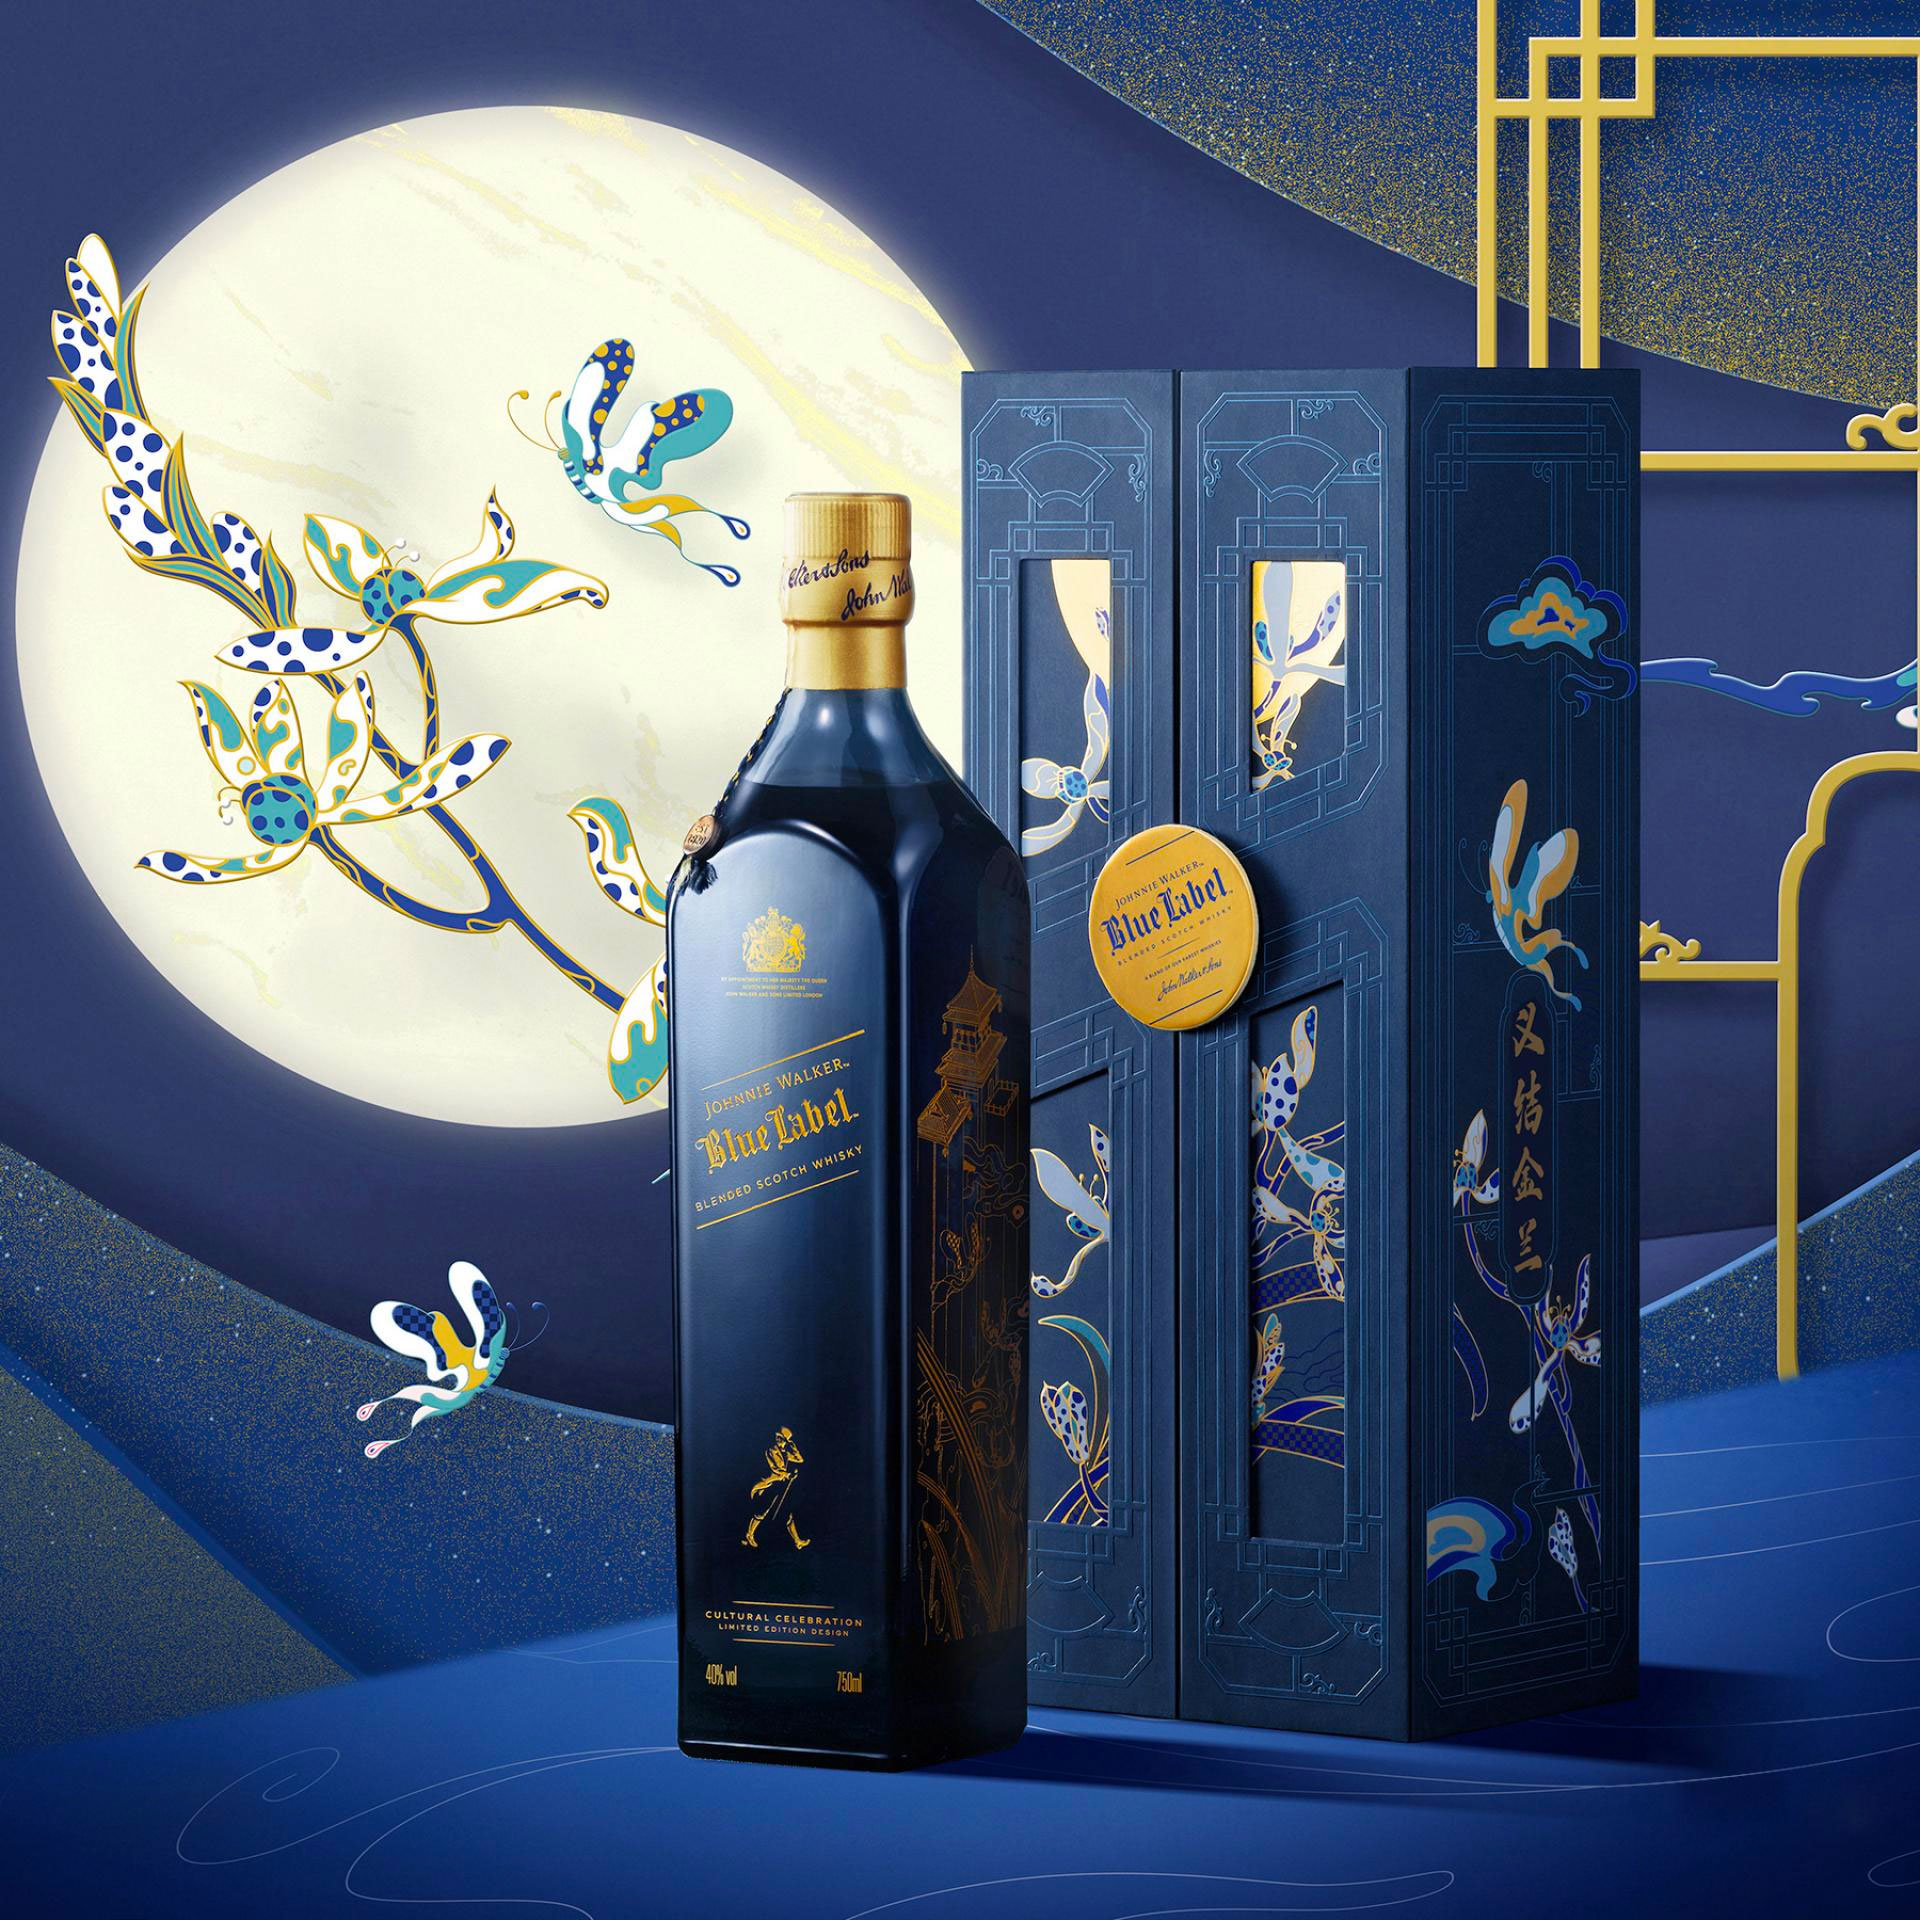 Scotland Meets China In This Johnnie Walker Blue Label Packaging